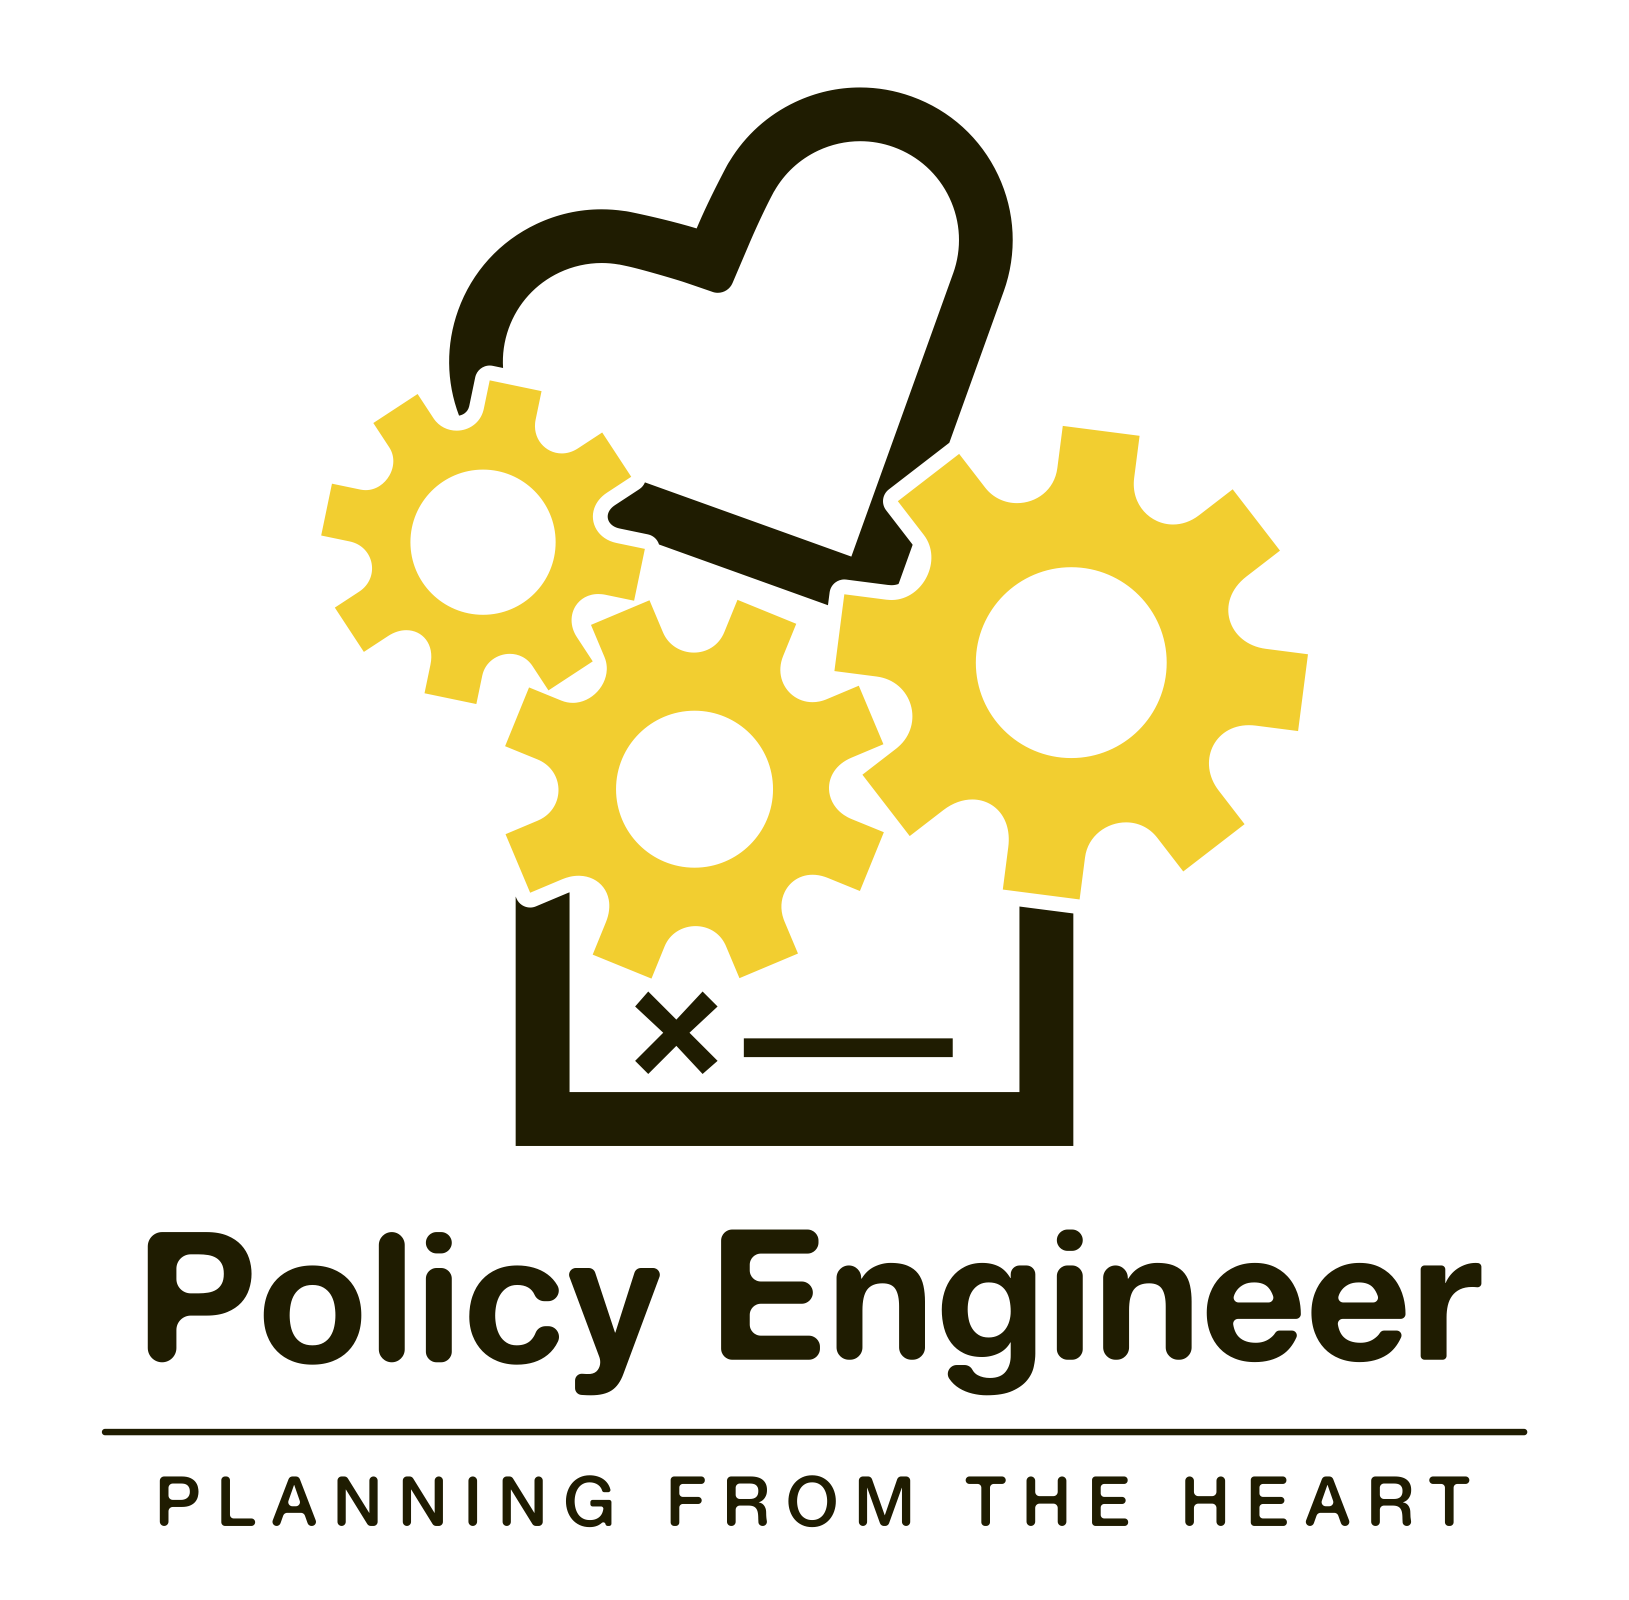 Policy Engineer round square logo copy 2